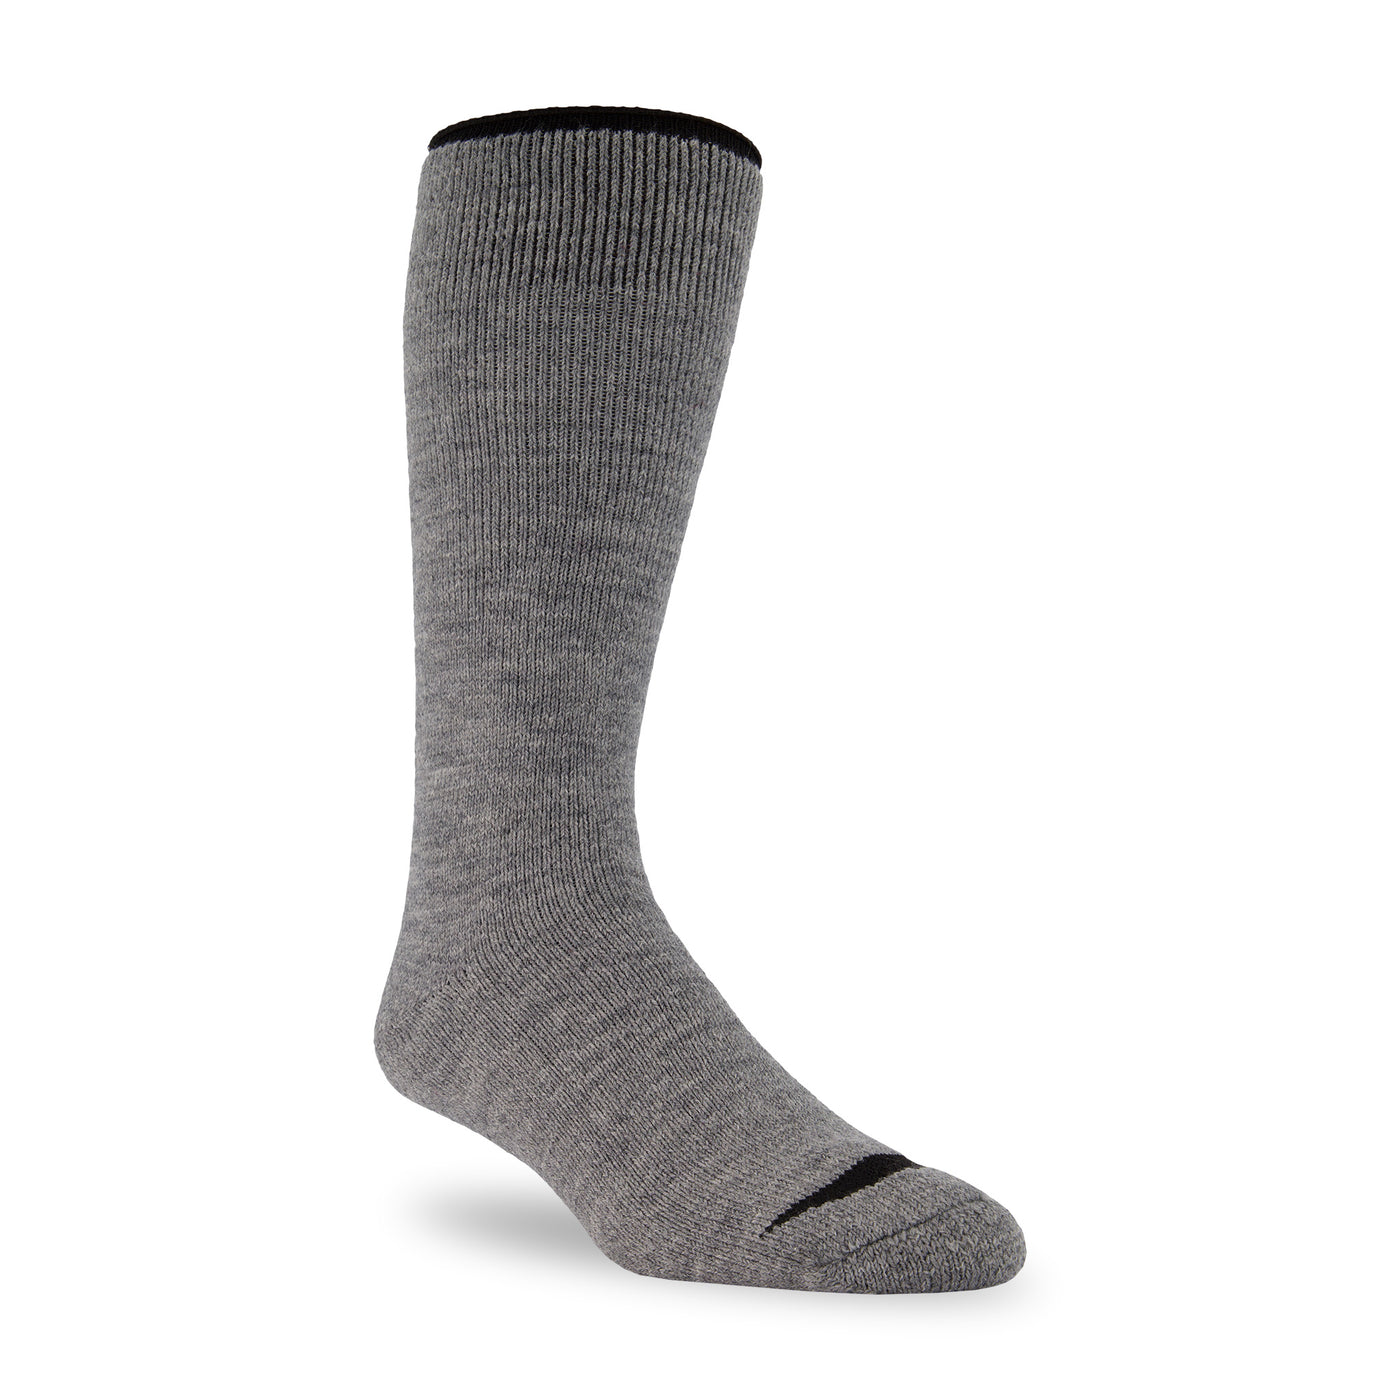 Mid Grey Over-the-Calf Thermal Socks